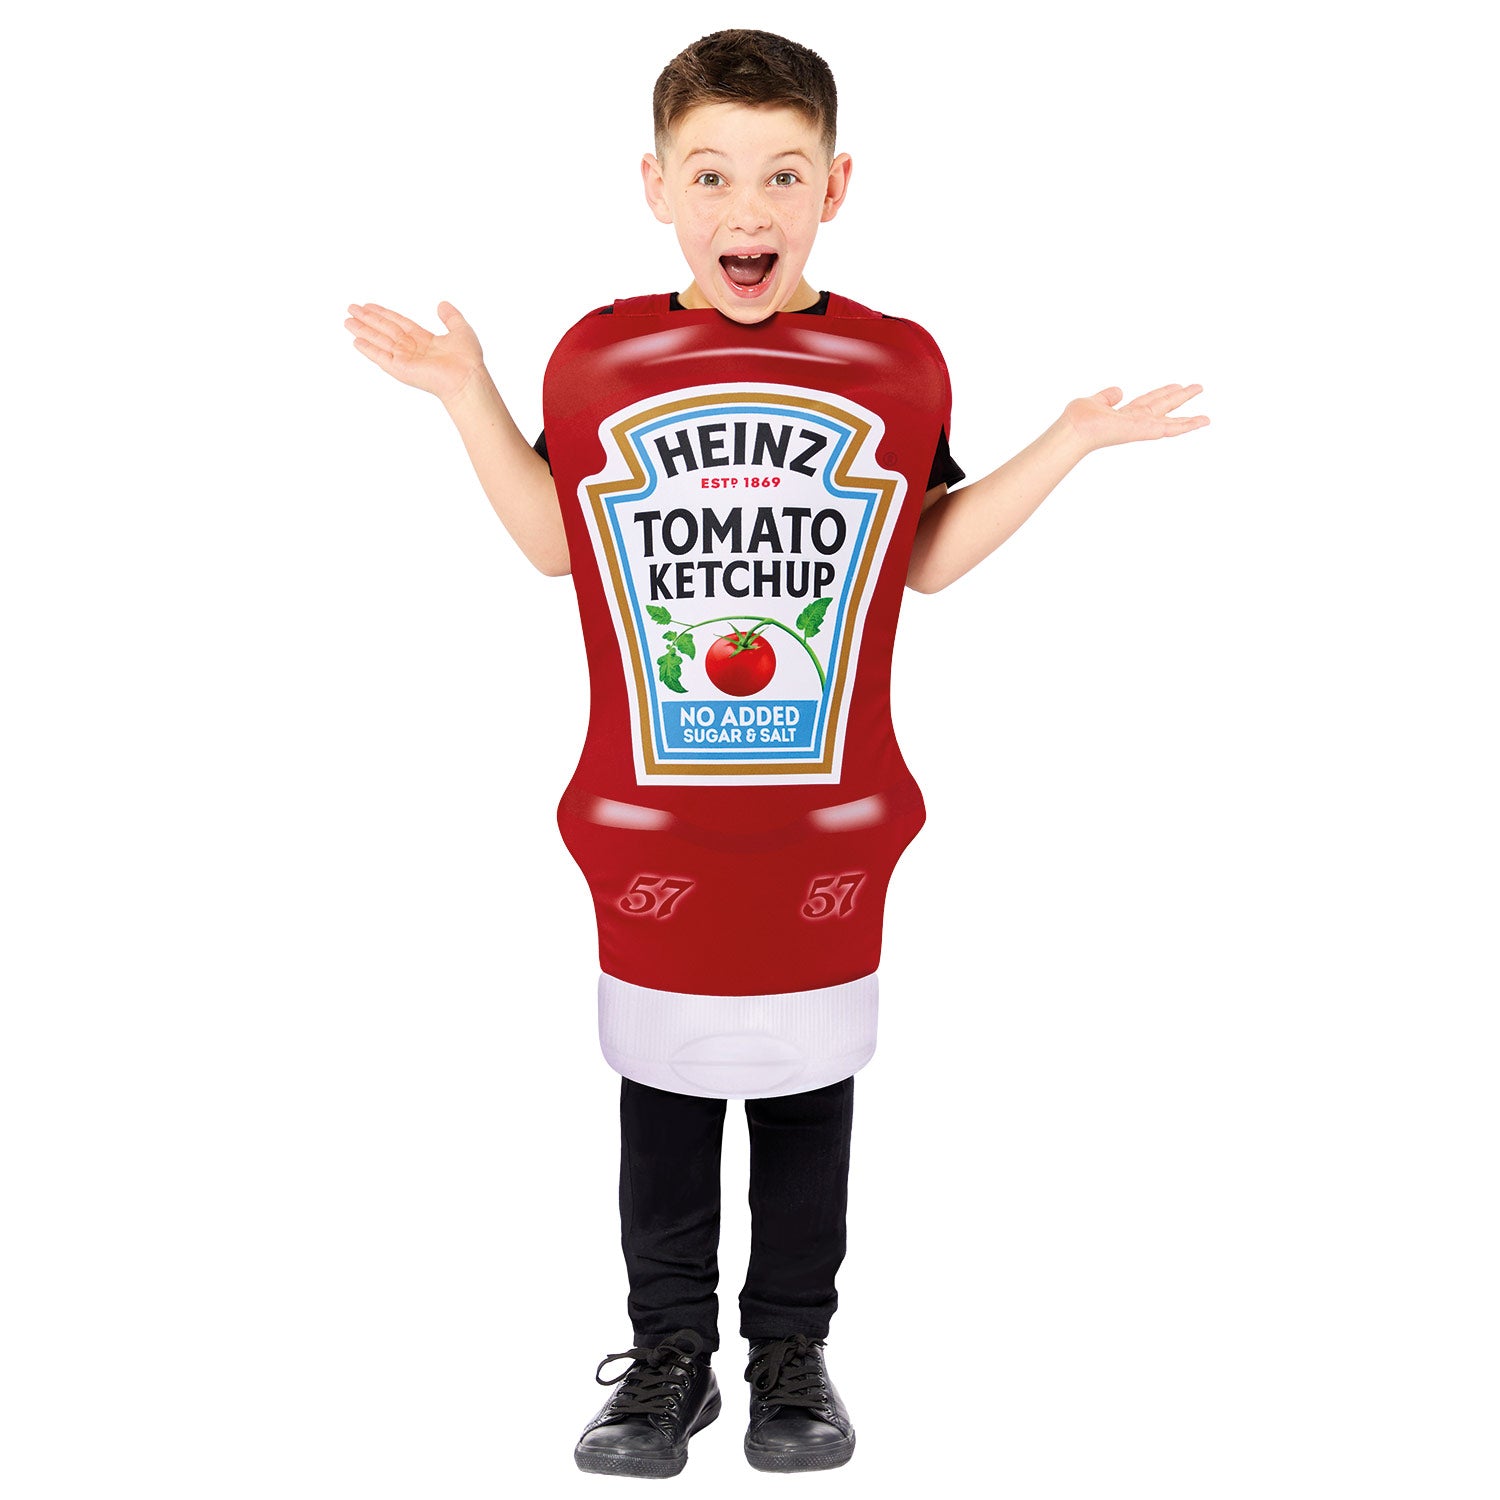 Heinz Ketchup Bottle - Childs Costume